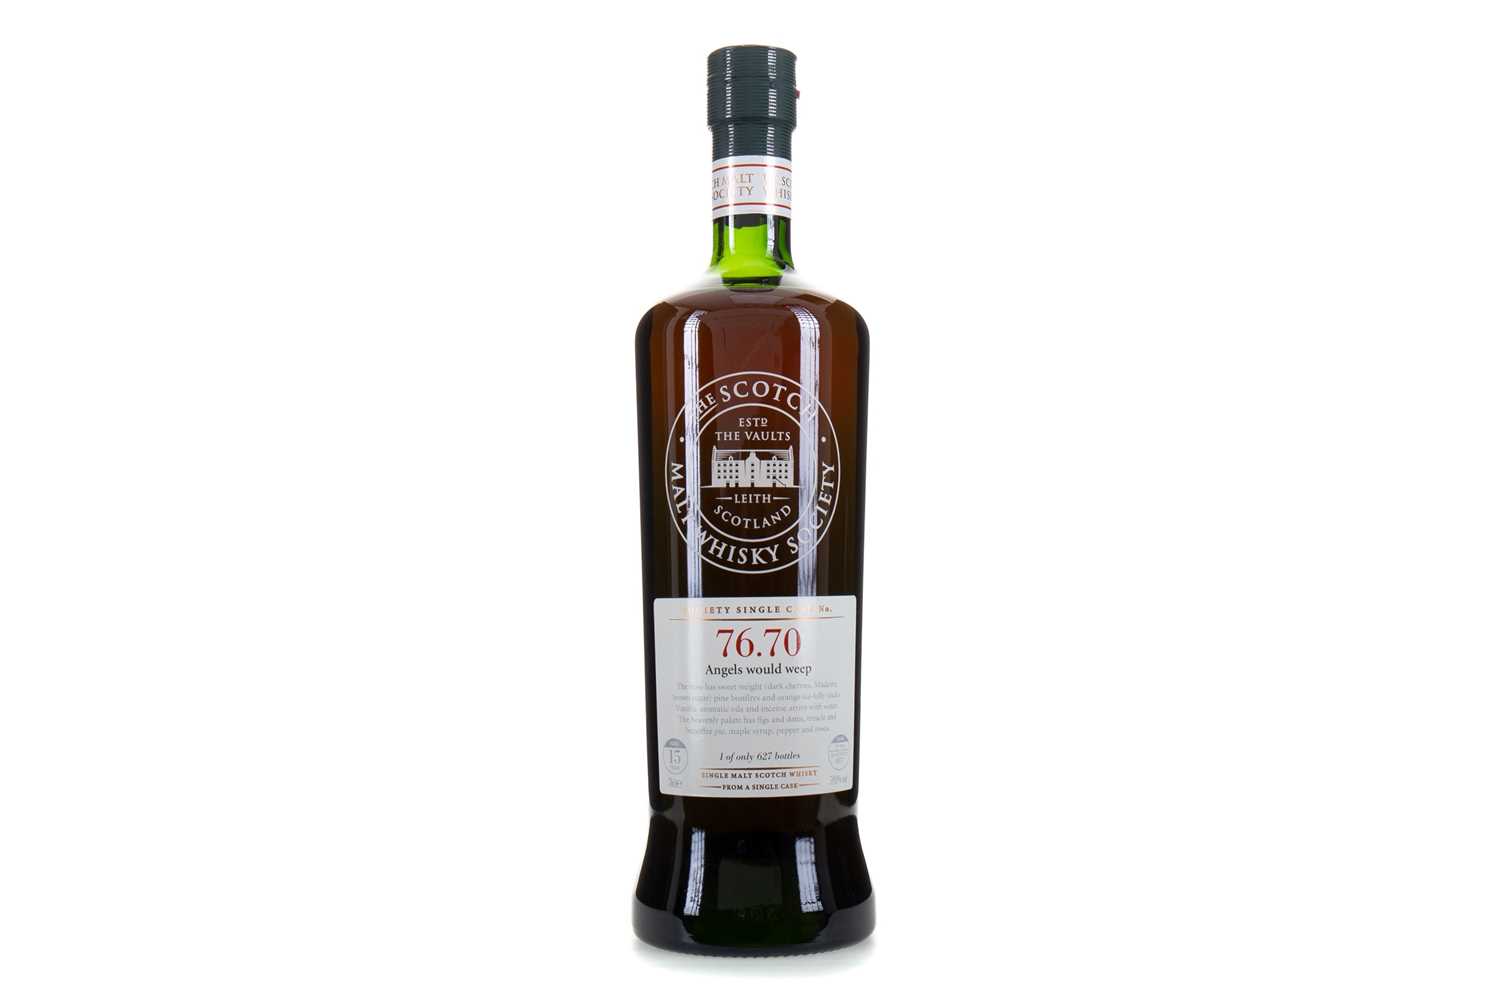 Lot 559 - SMWS 76.70 MORTLACH 15 YEAR OLD